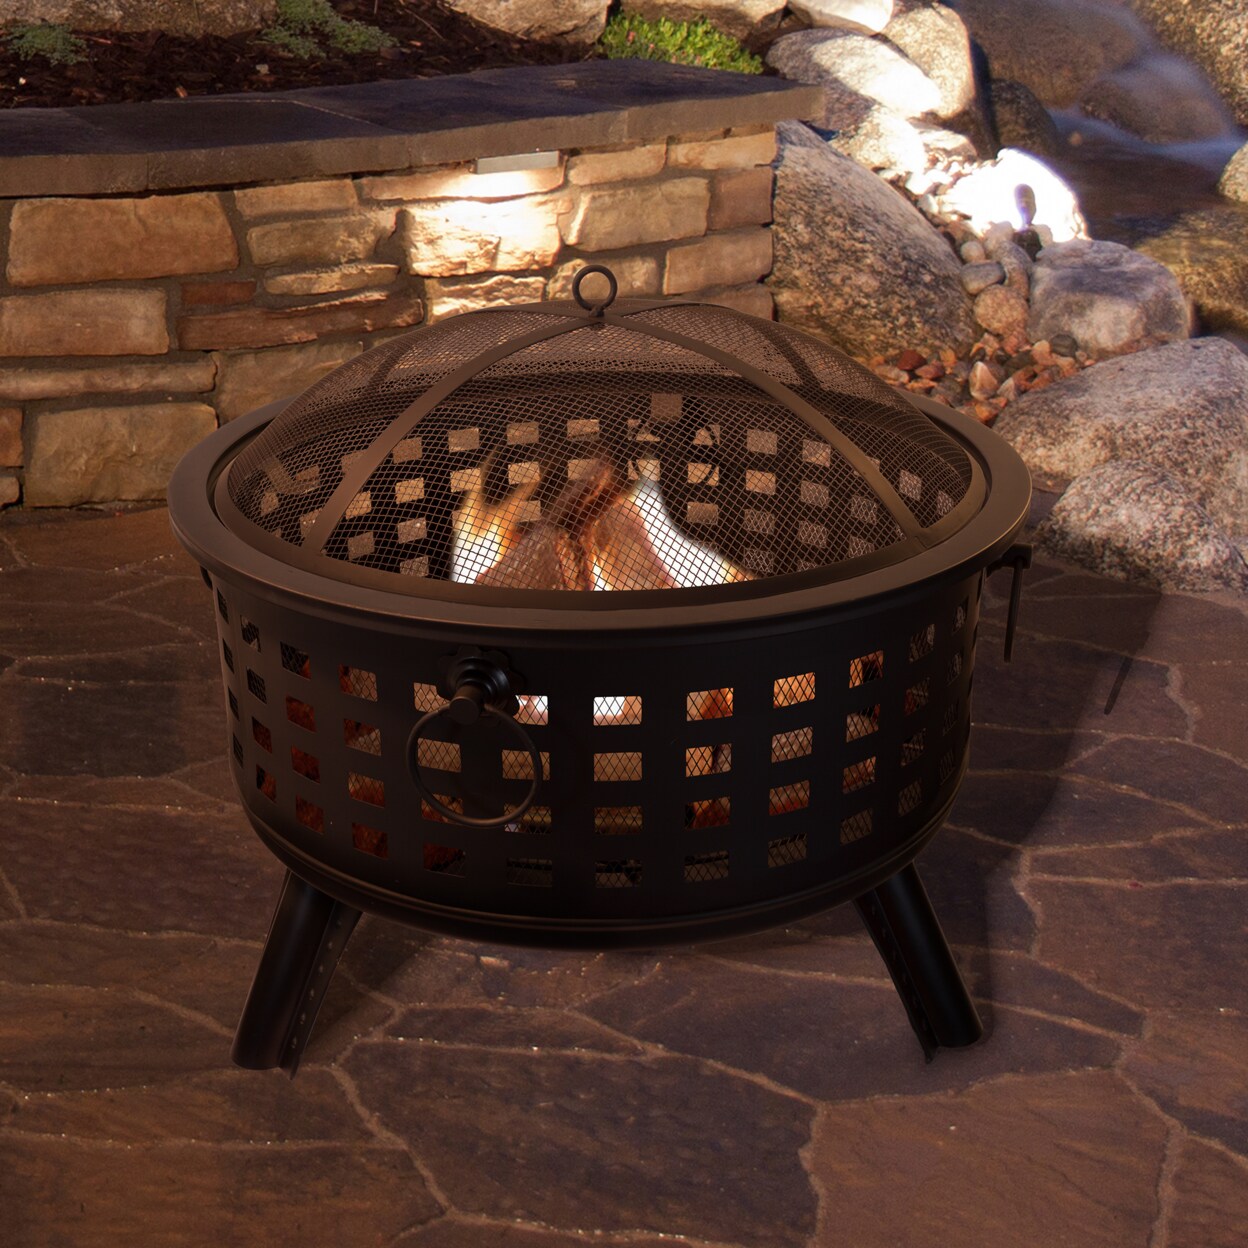 Pure Garden Fire Pit Set Wood Burning Pit - Includes Spark Screen and Log Poker - Great for Outdoor and Patio 26 Inch Round Metal